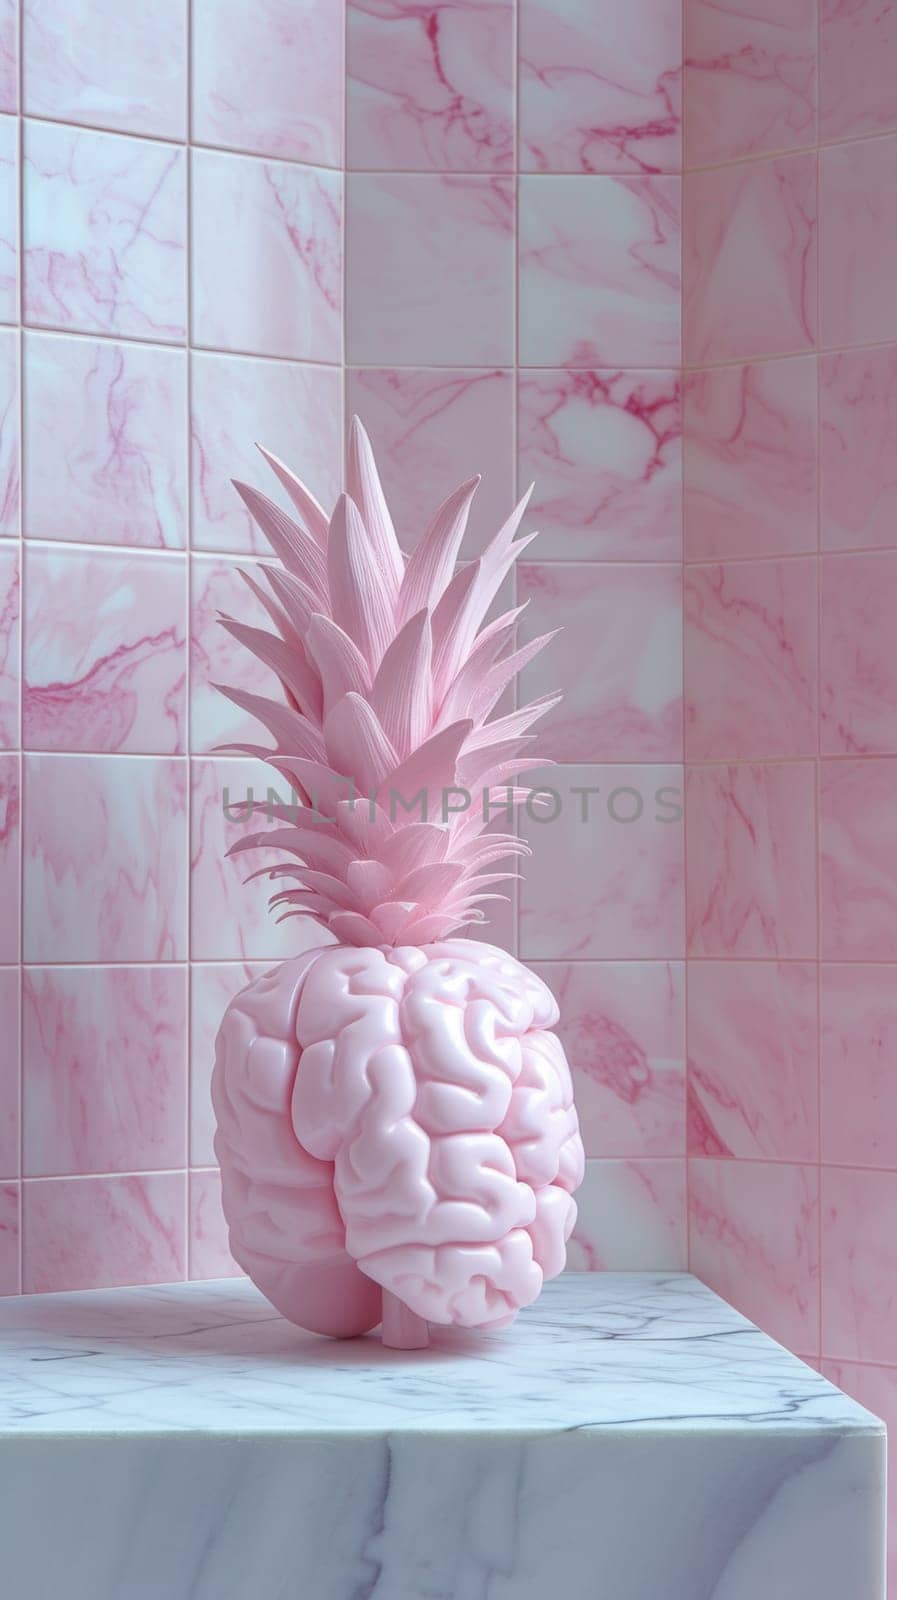 A pink pineapple with a brain on top of it sitting in front of some tiled walls, AI by starush